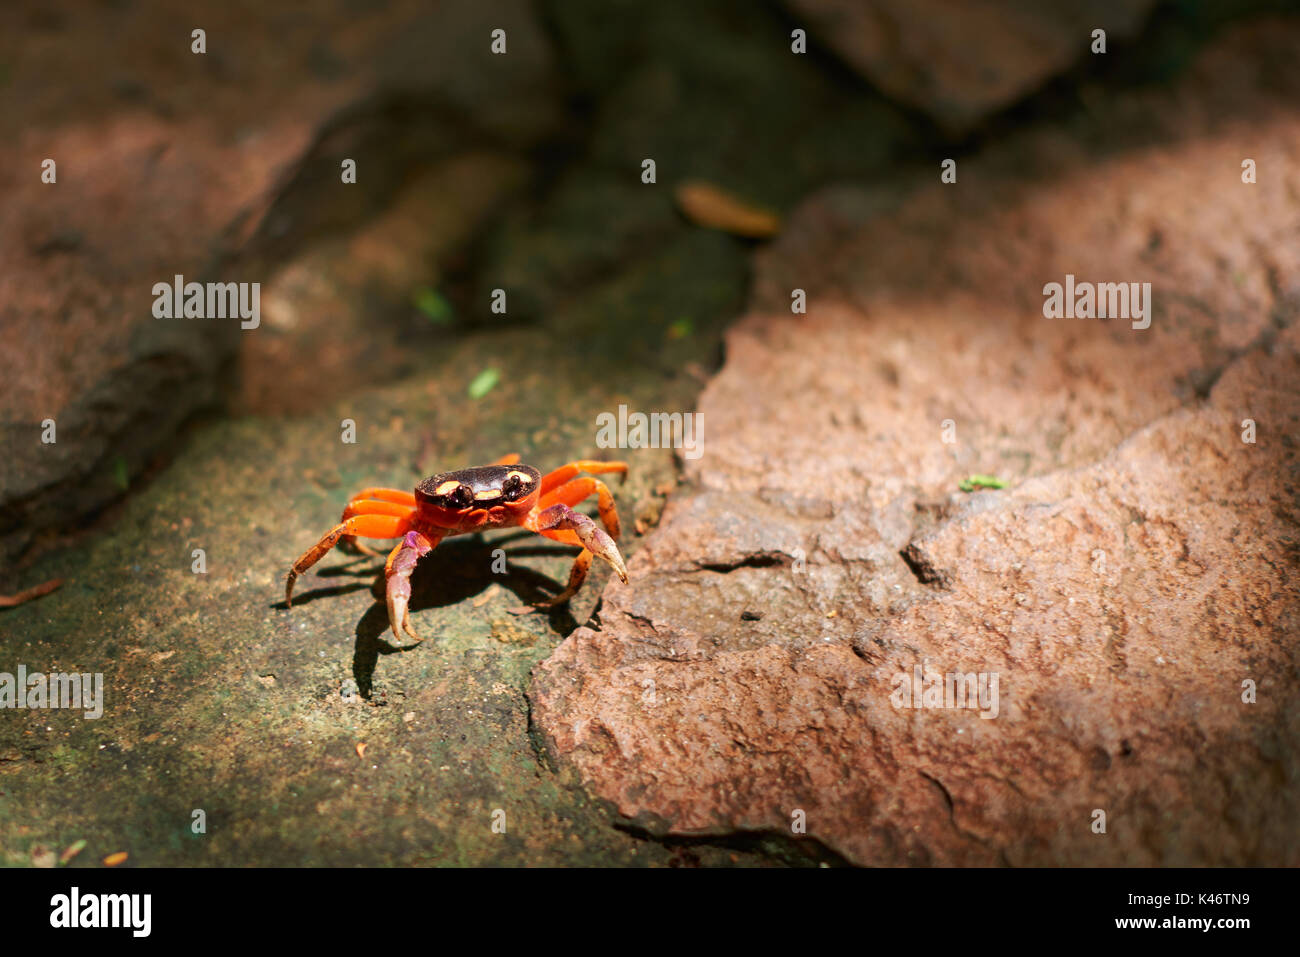 Small red crab staying on brown stone Stock Photo